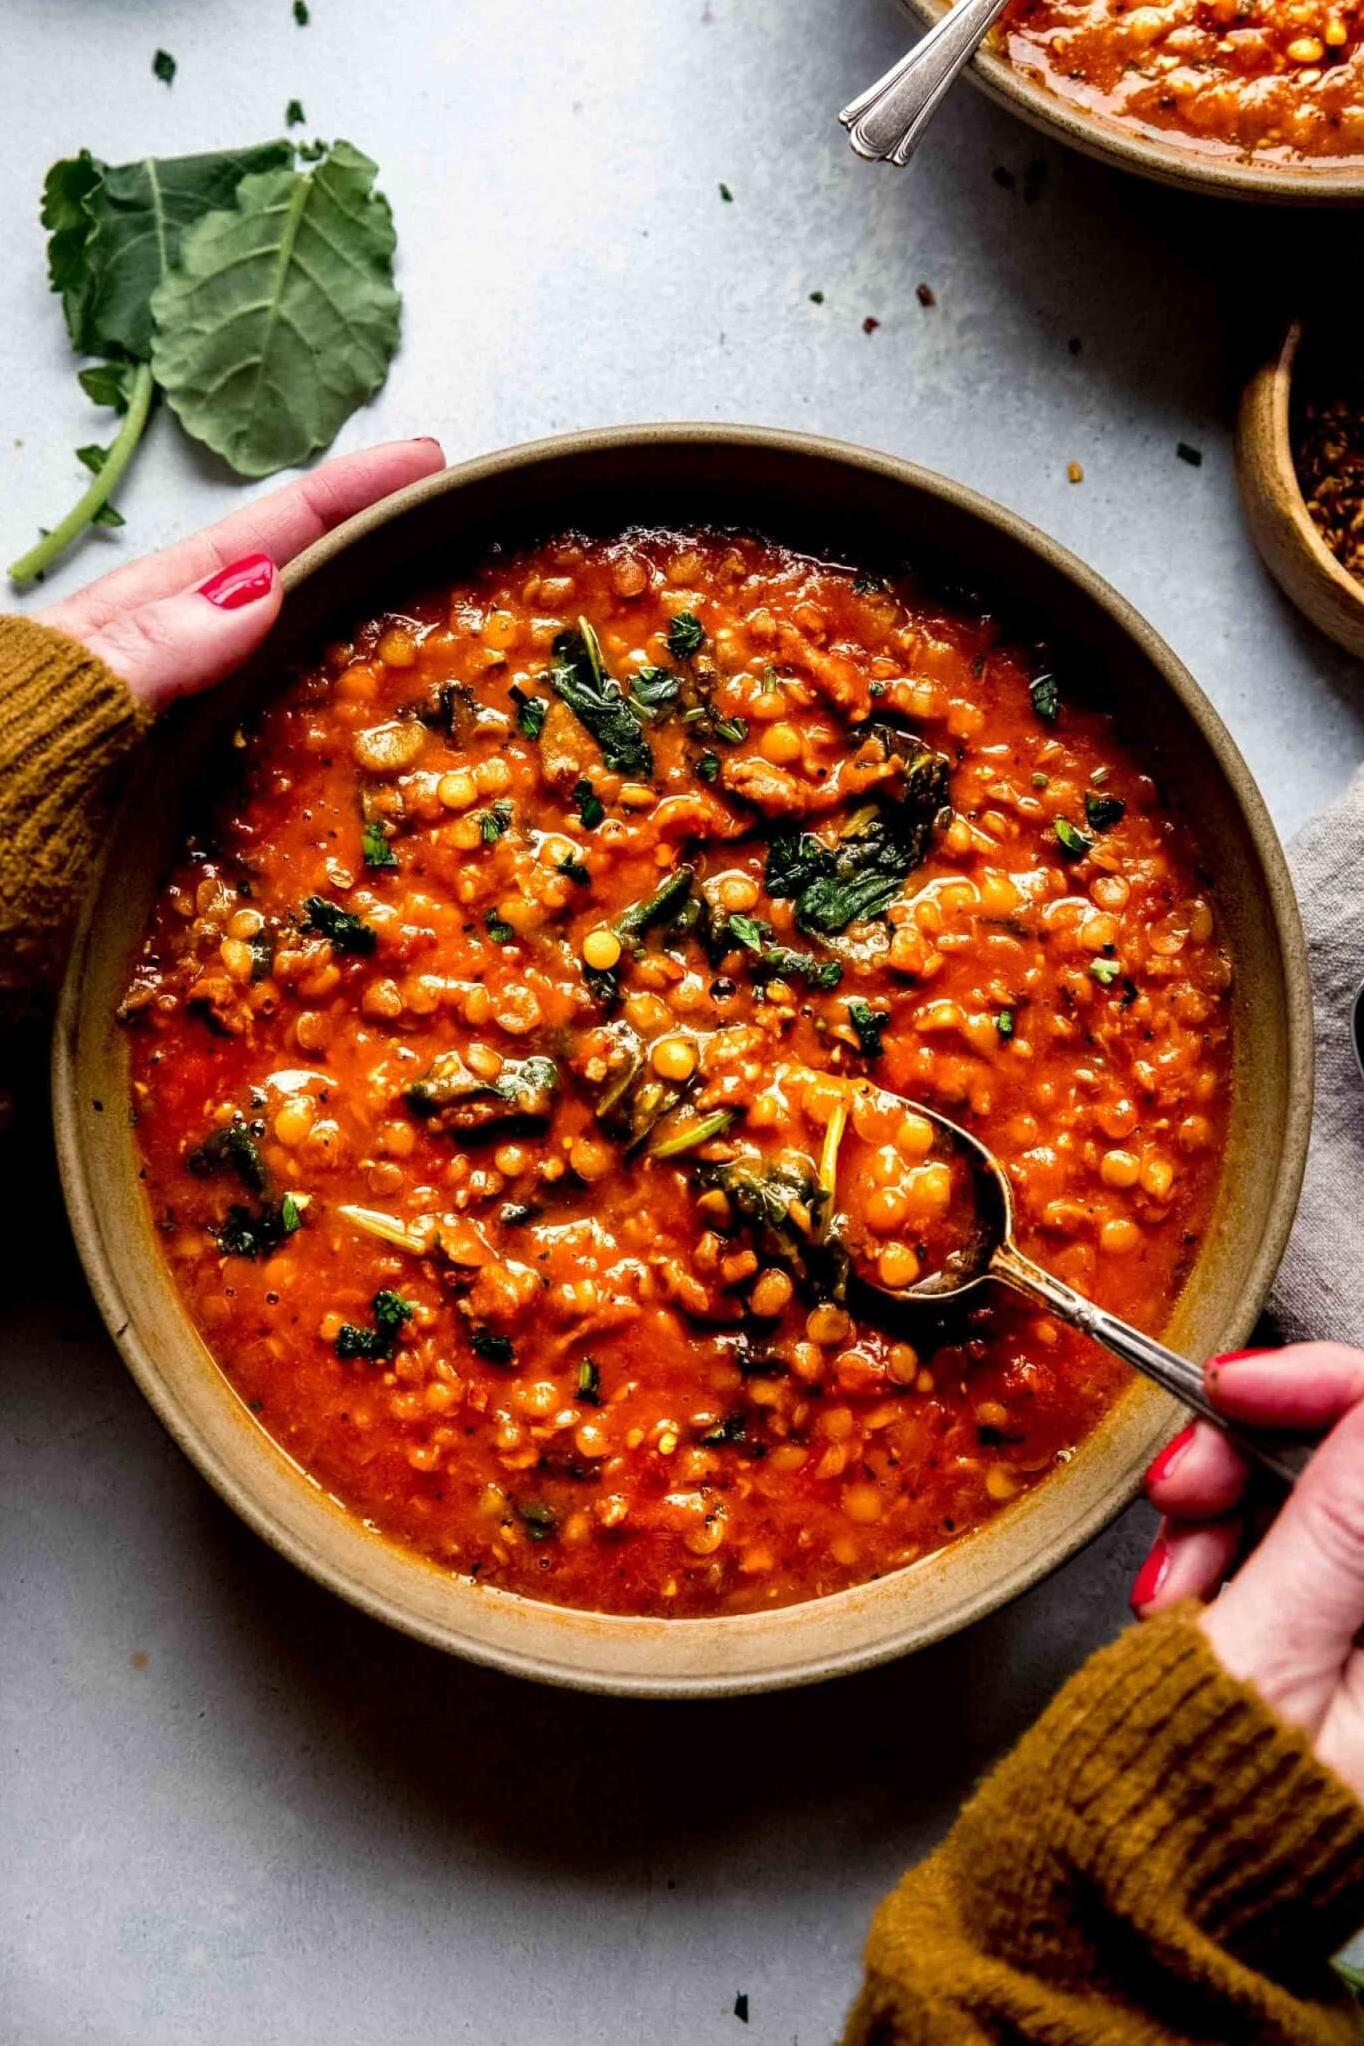 Warm Your Soul with This Hearty Lentil Soup Recipe!